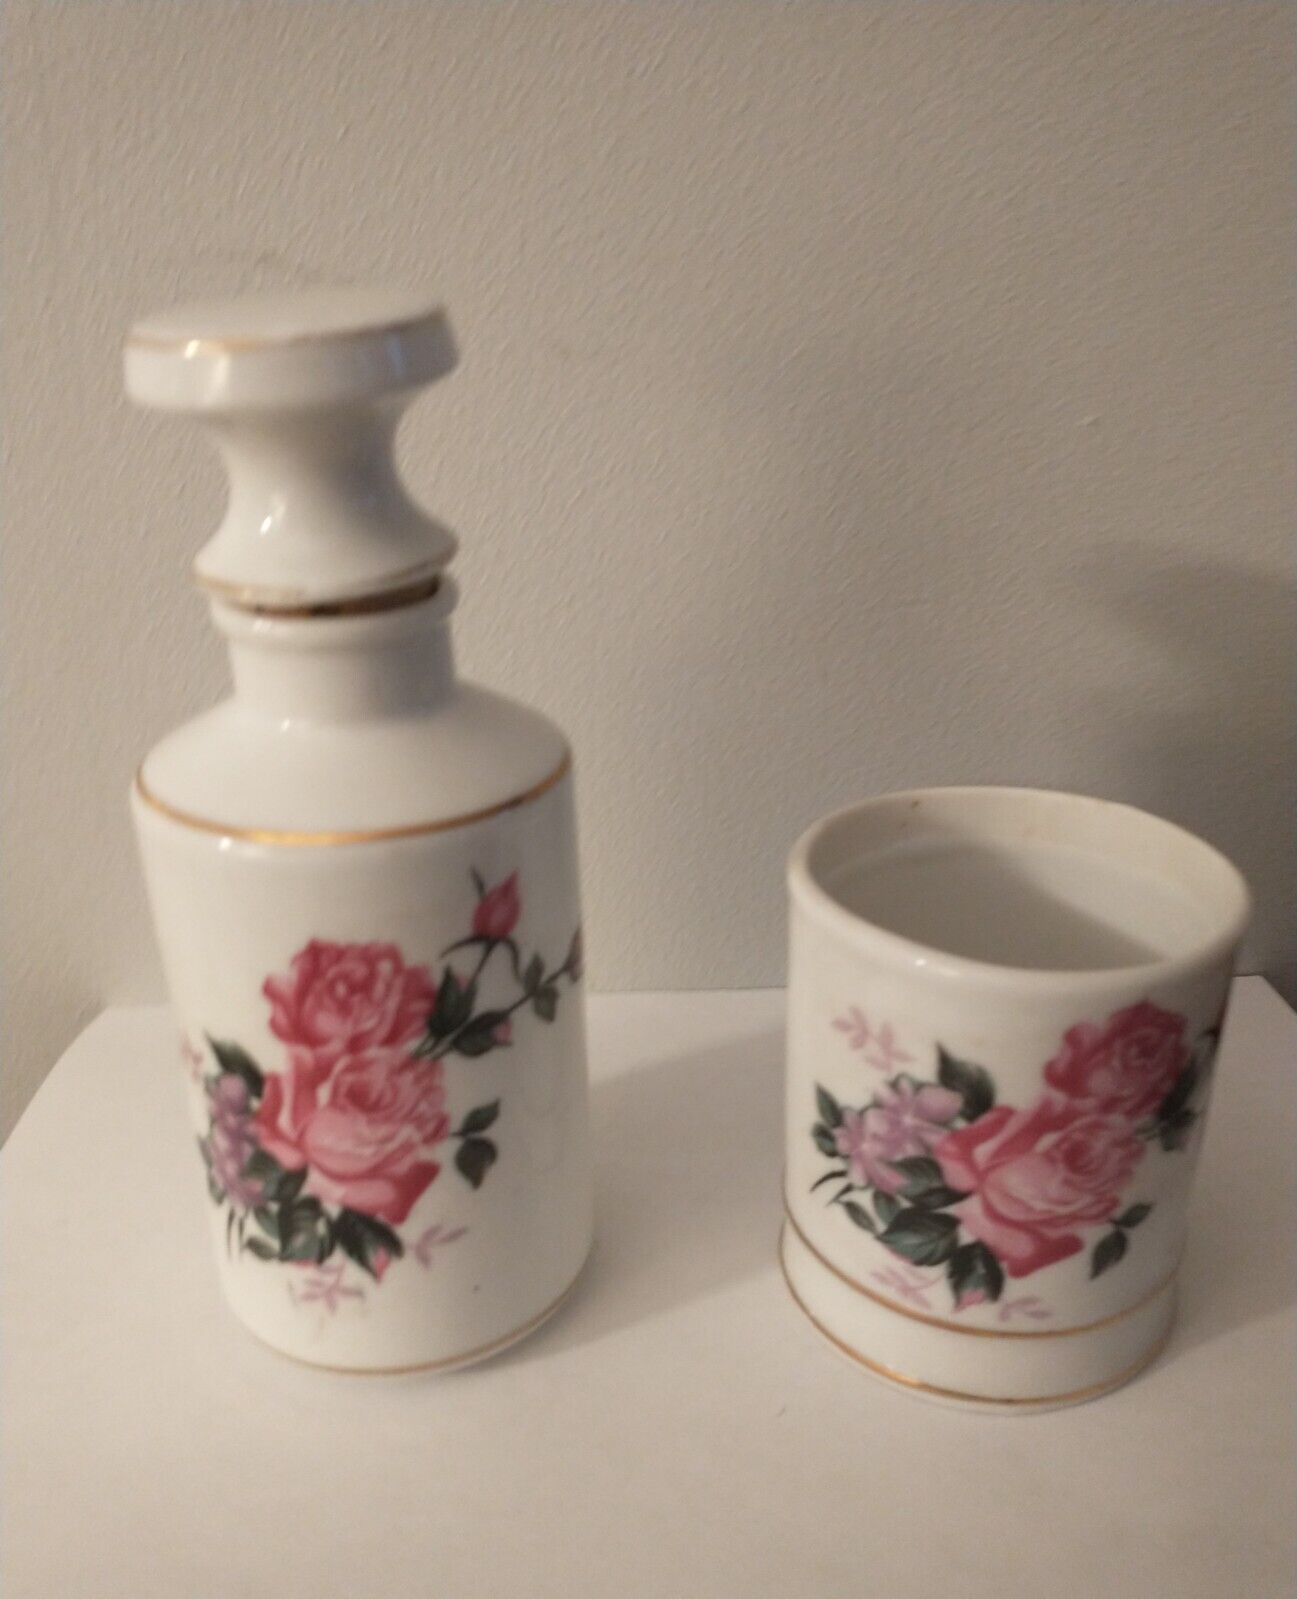 Vintage Porcelain Moss  Rose  Perfume Bottle With Cork Top + Matching Glass.